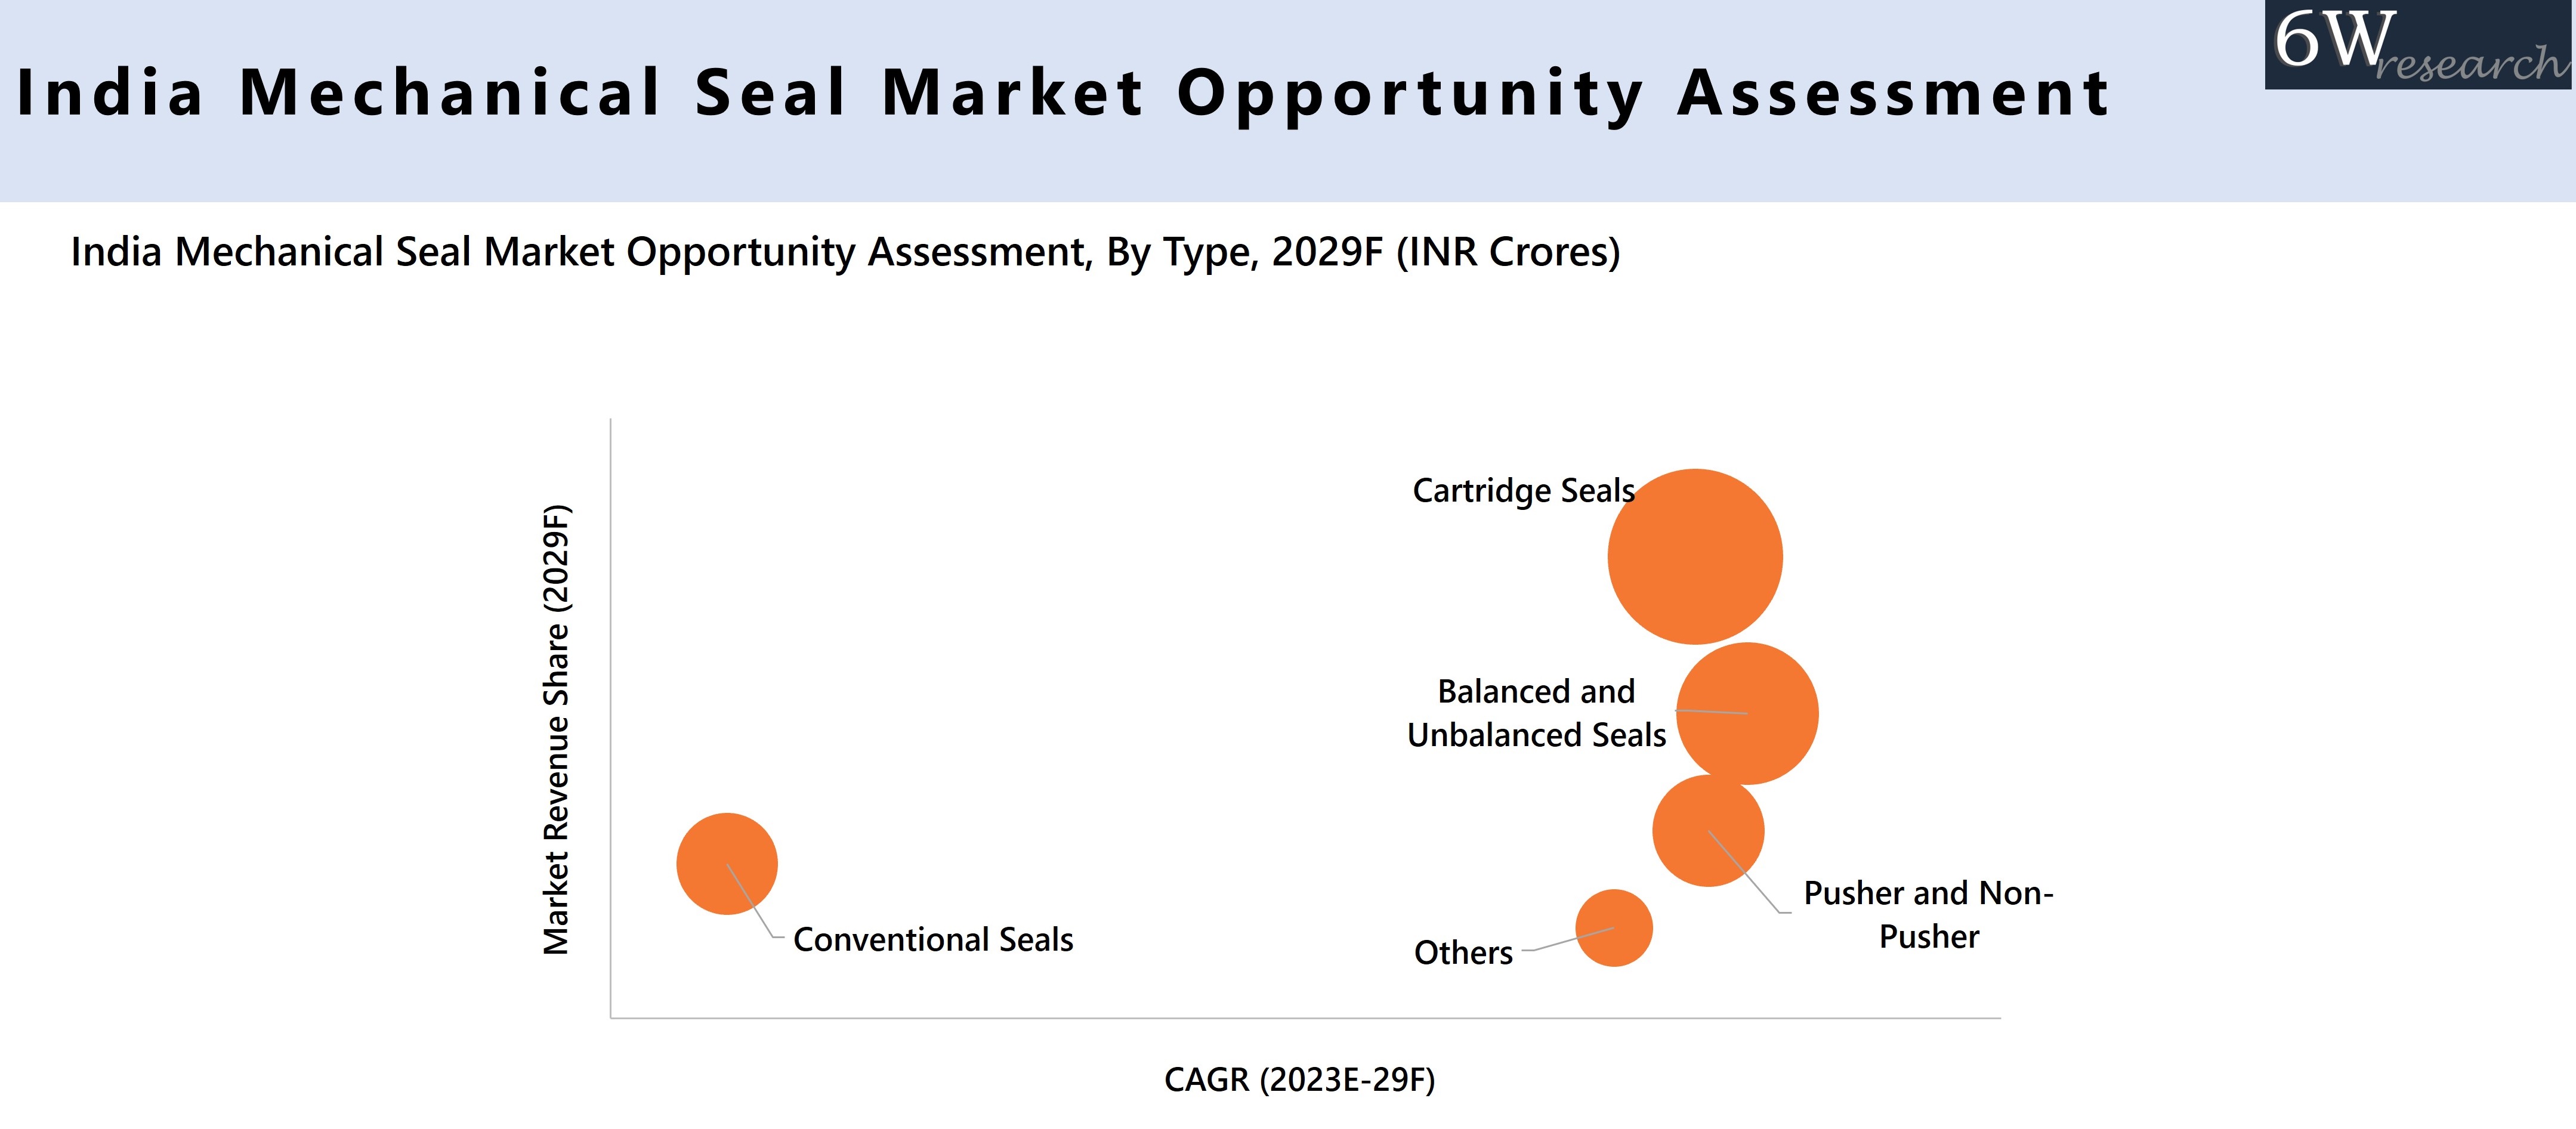 India Mechanical Seal Market Opportunity Assessment